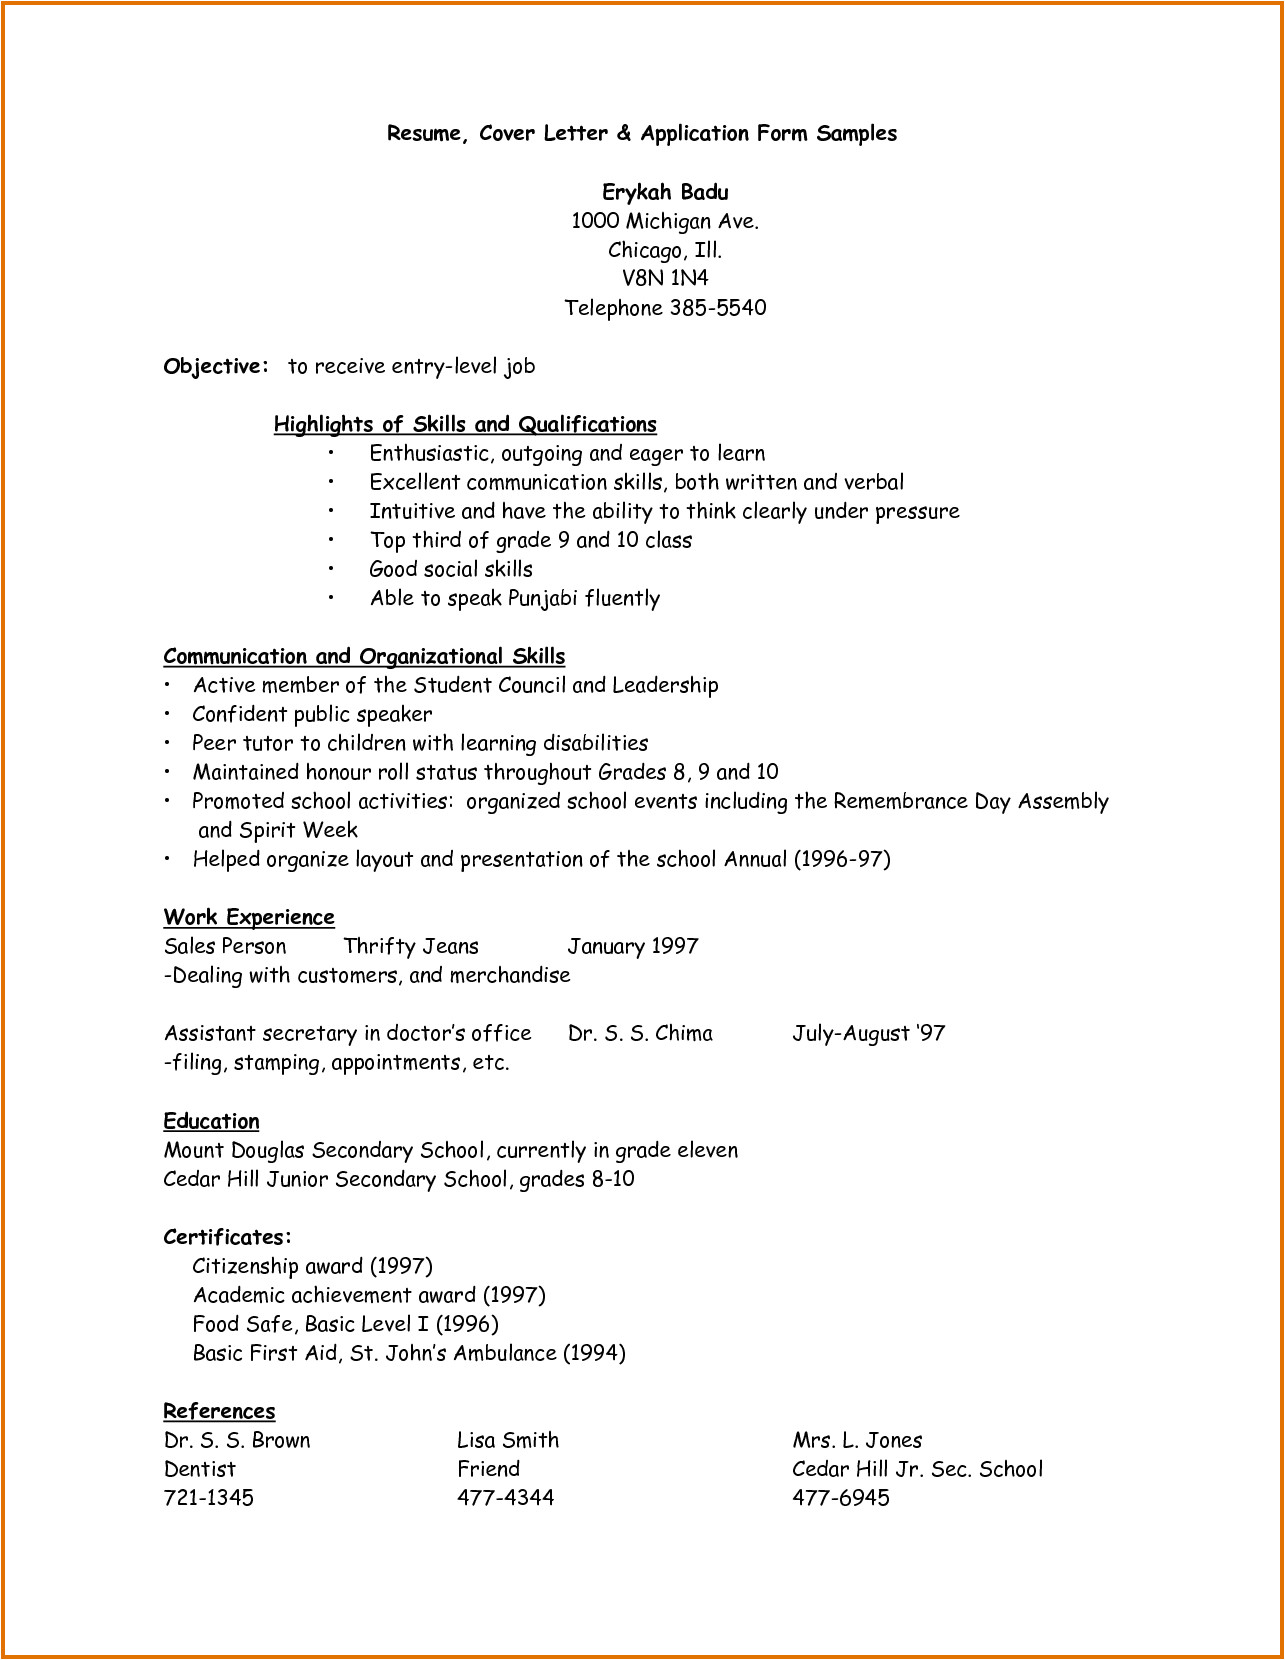 Sample Letter Of Resume to Work Sample Of Application Letter and Resumereference Letters